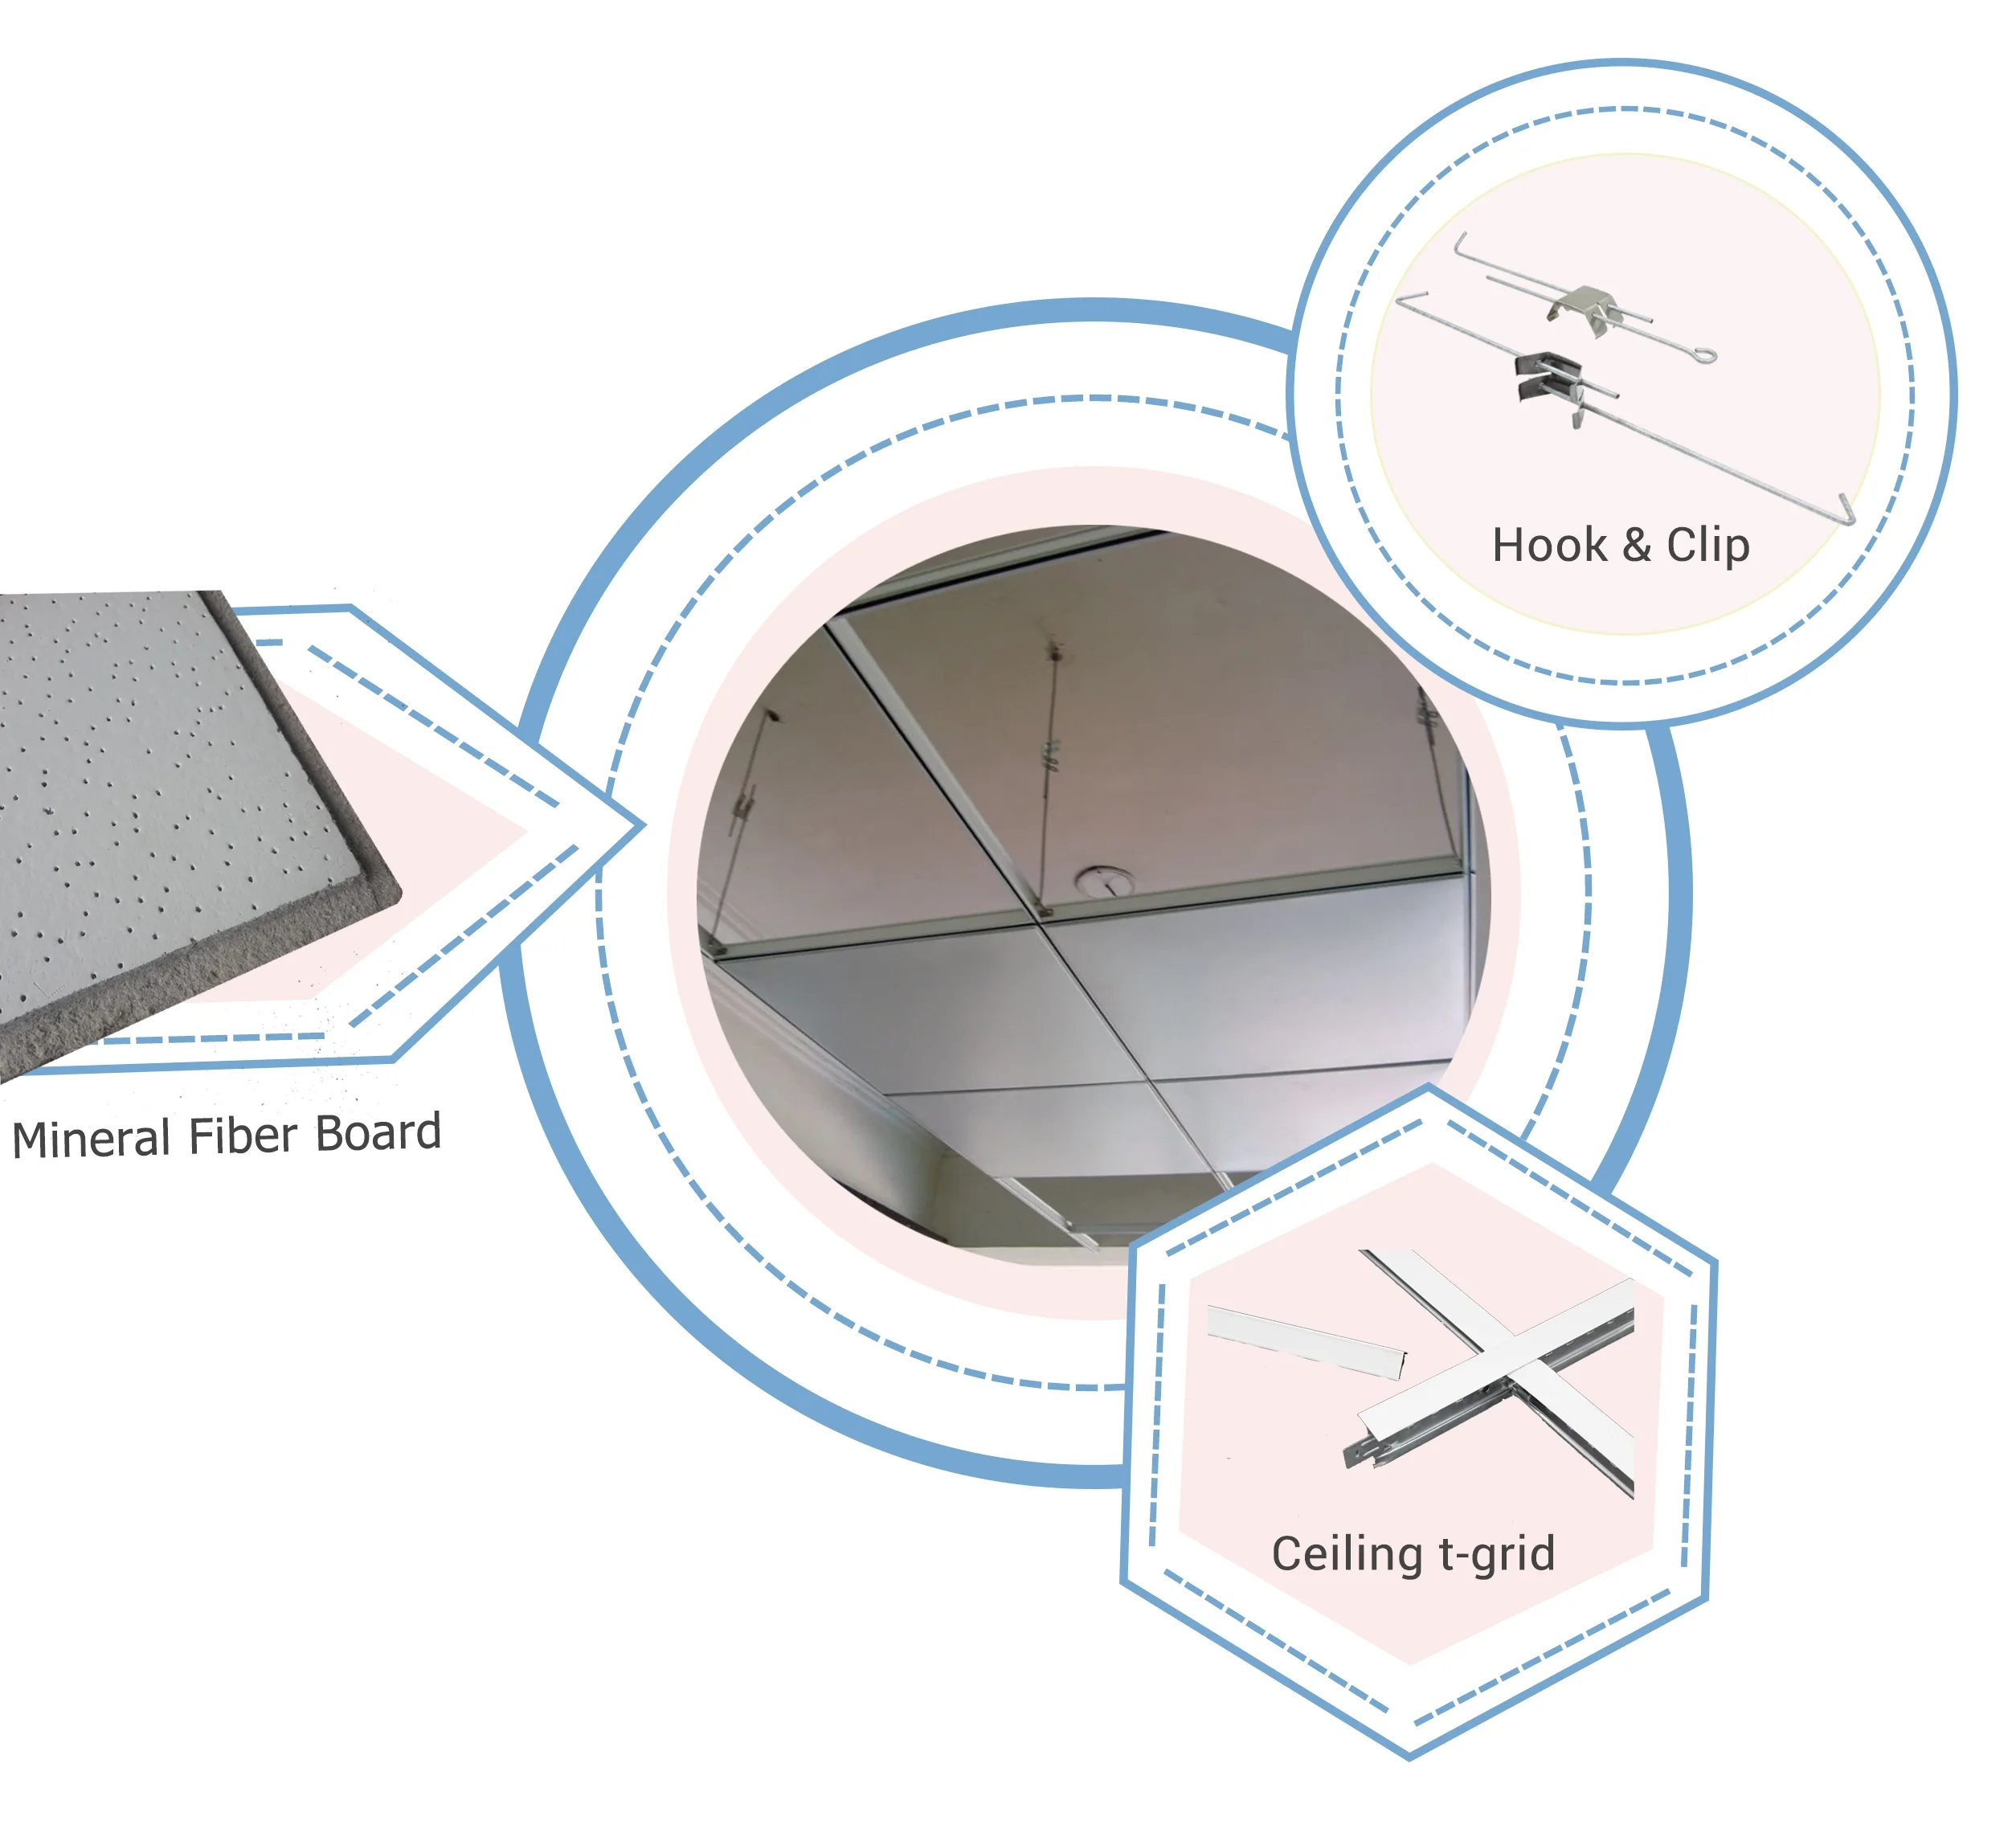 Mineral Fiber Lining for Tent Ceiling